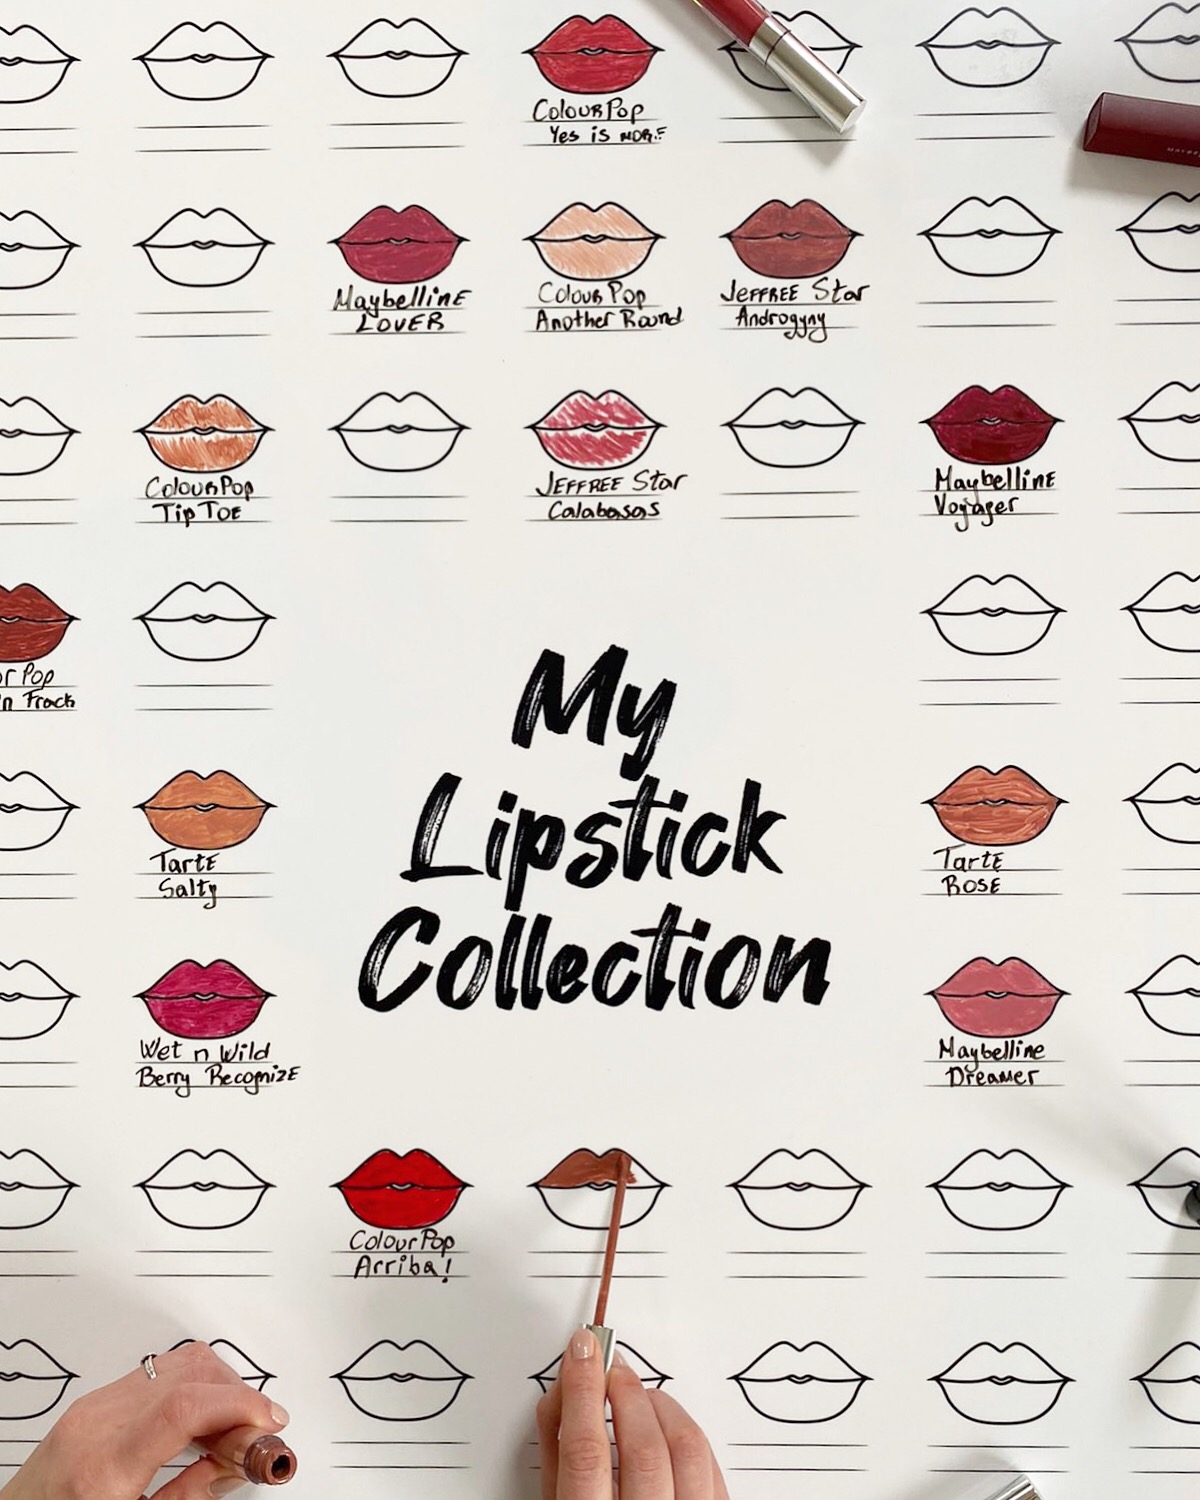 Say goodbye to your lipstick chaos - The Swatch chart